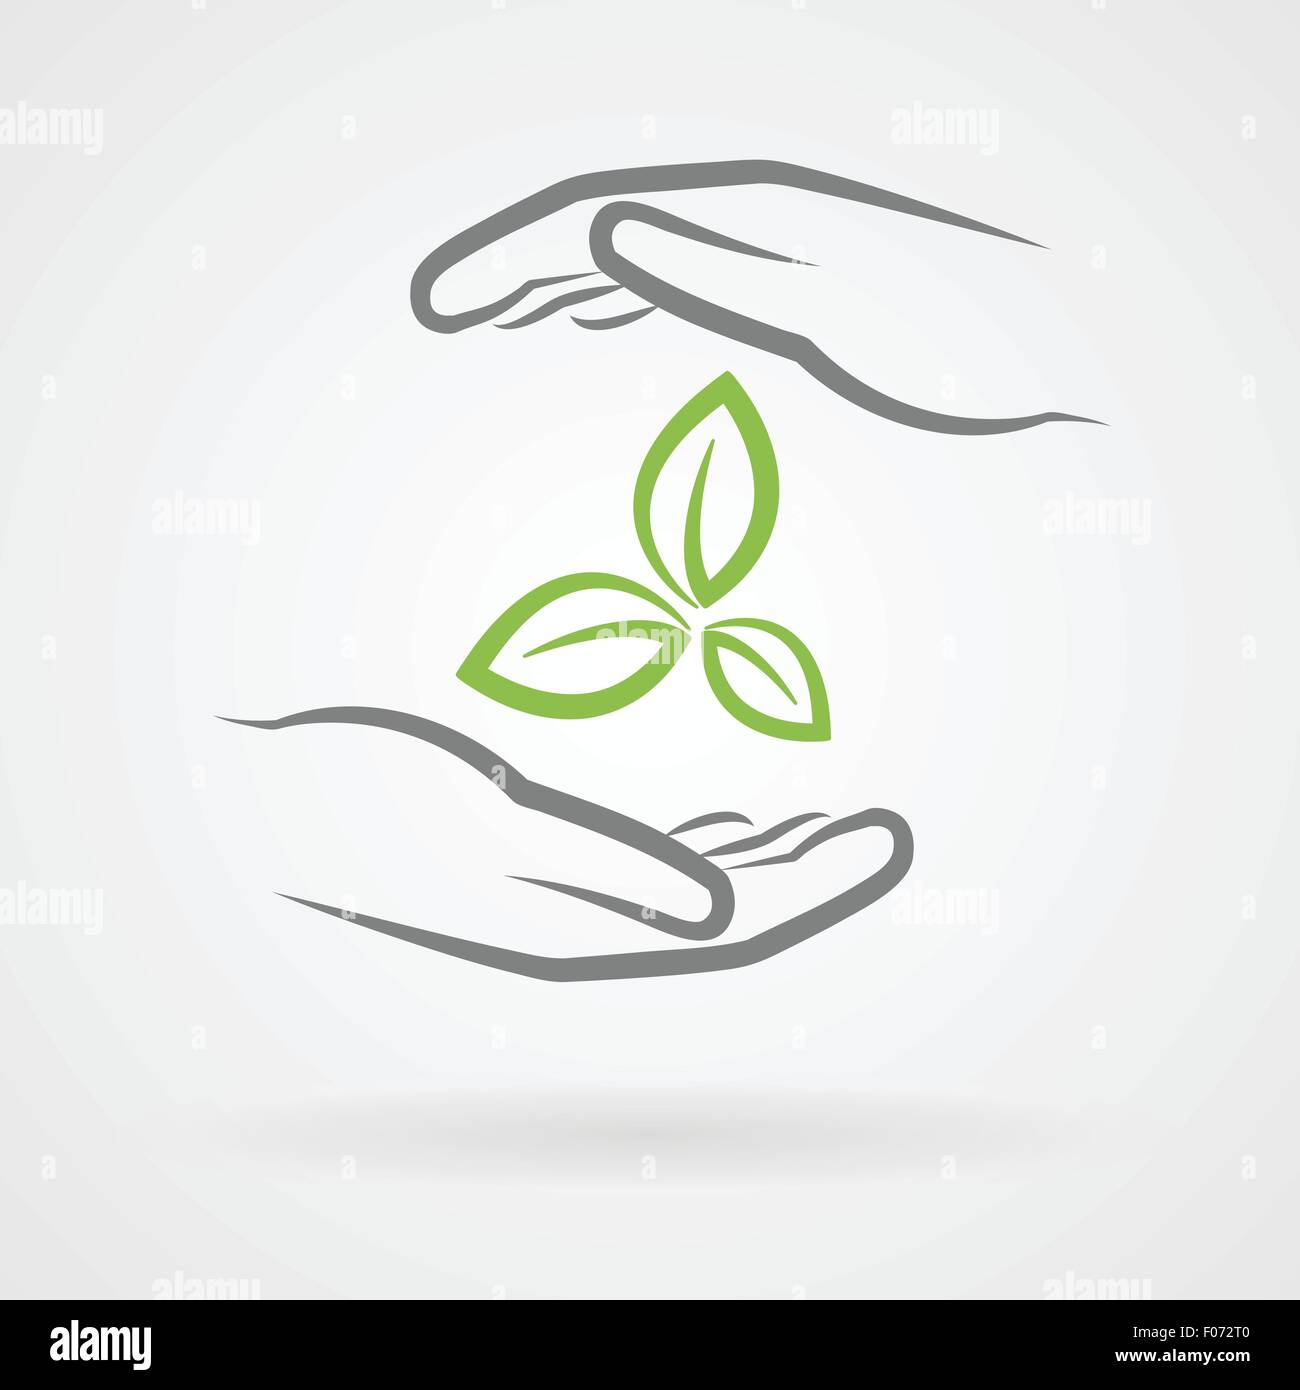 Hands with green leaves icon as environmental protection concept vector illustration. Stock Vector